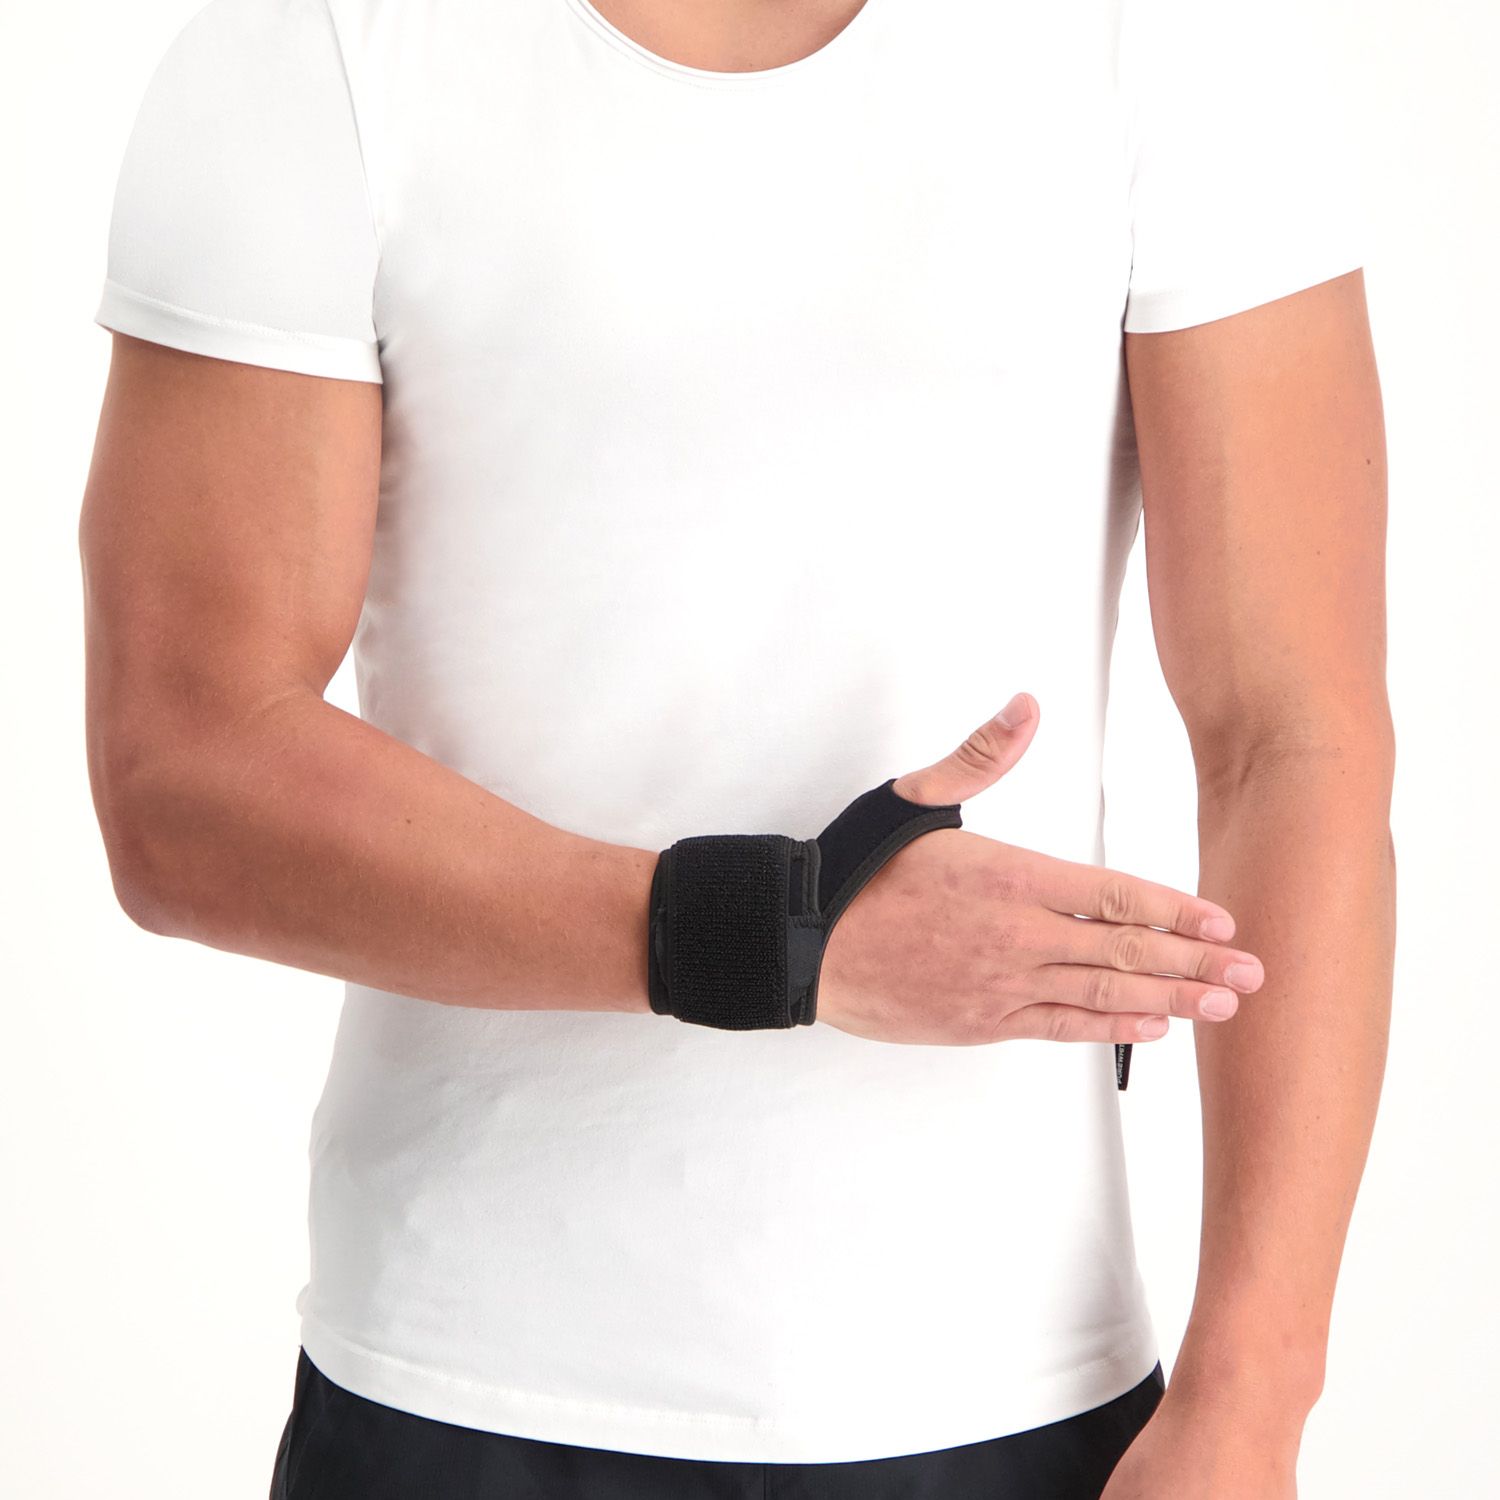 dunimed wrist support with Velcro strap stretched out